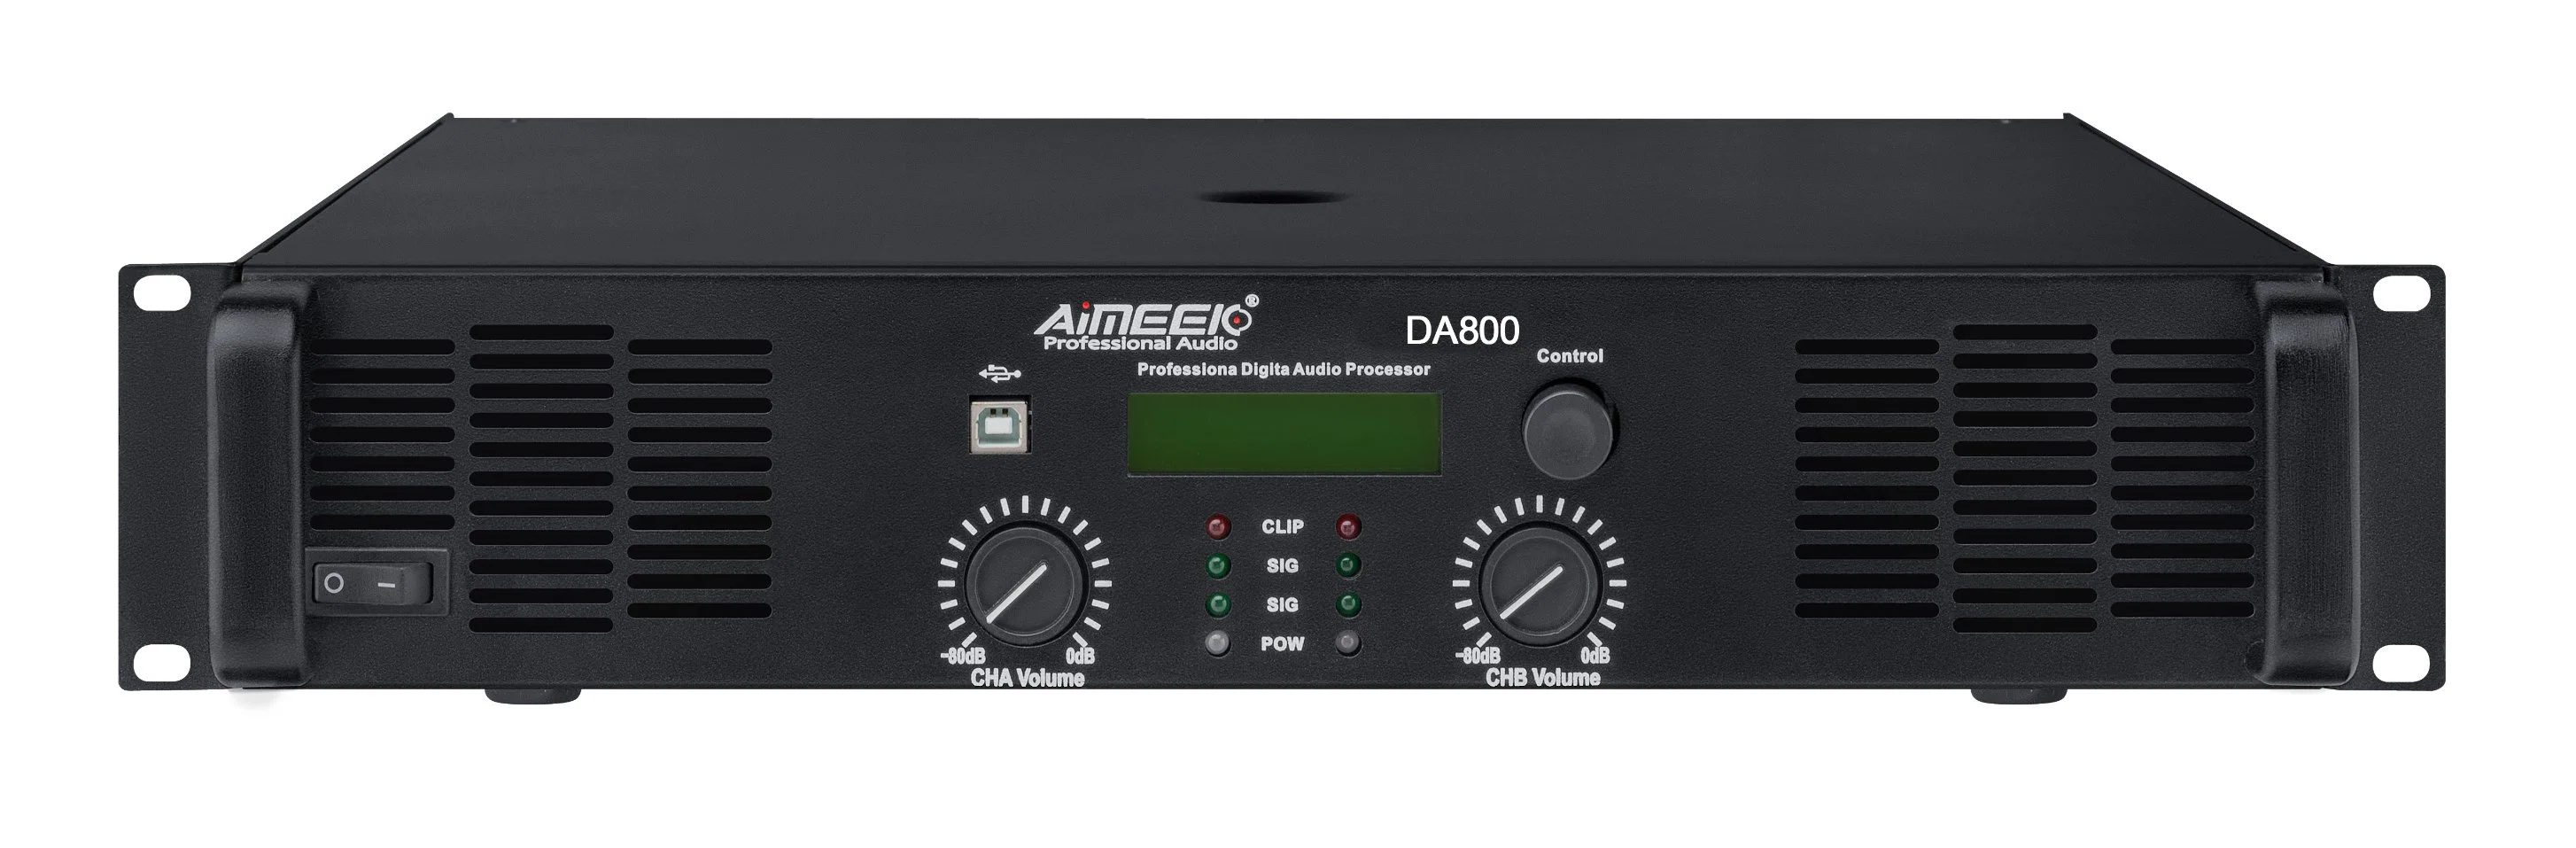 IP Network Public Address PA System Amplifier with Dante & DSP for DJ Speakers